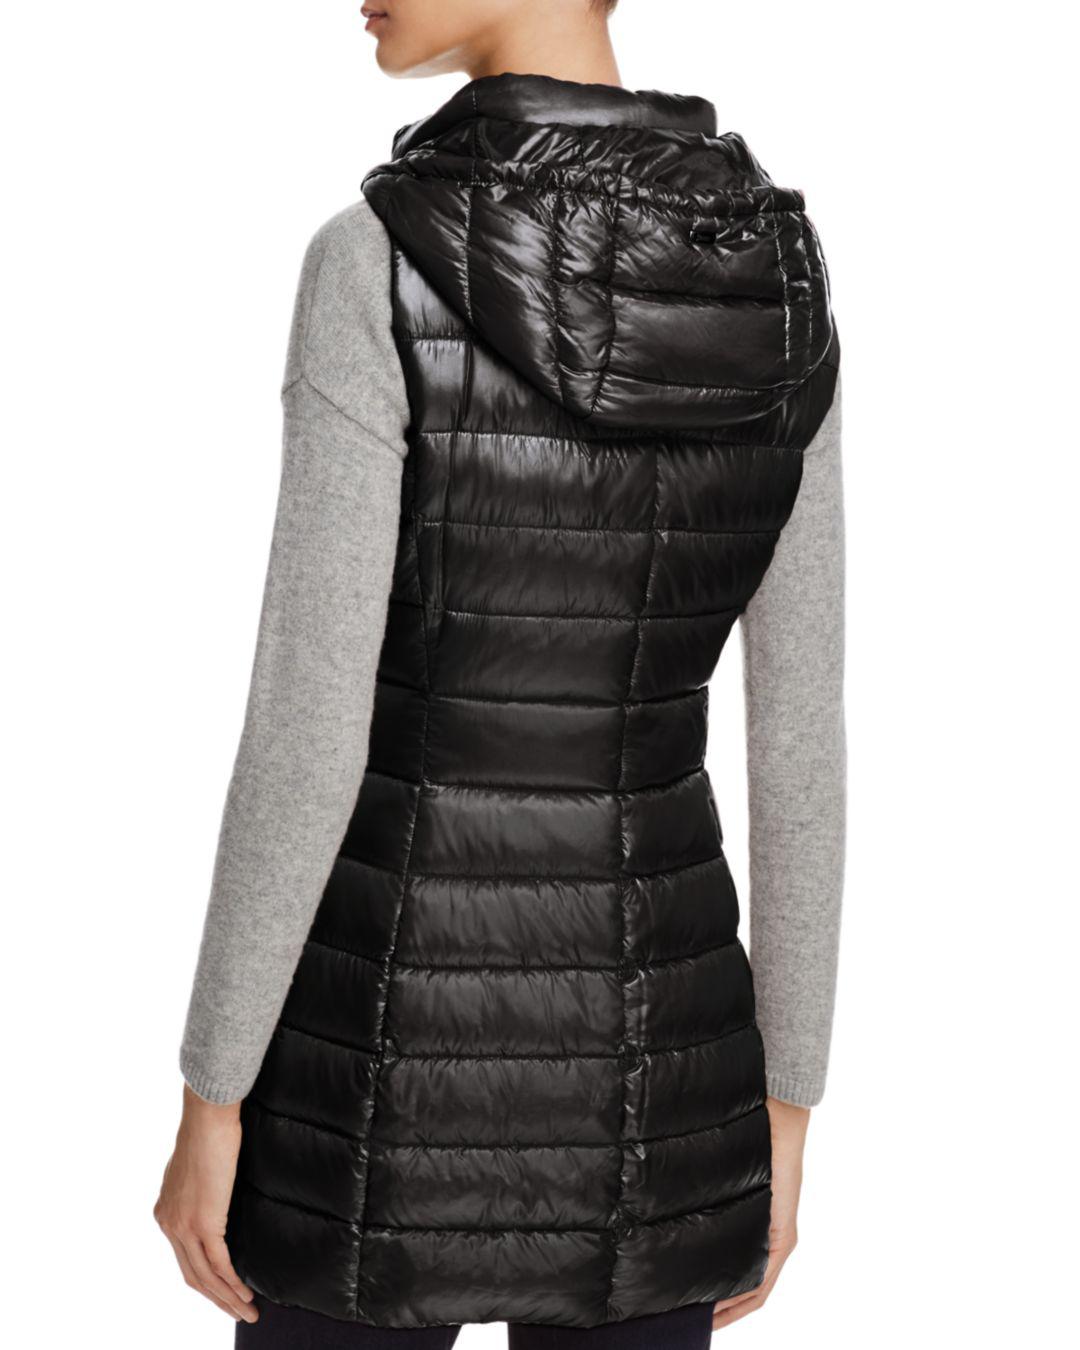 long down vest with hood Cheaper Than Retail Price> Buy Clothing ...